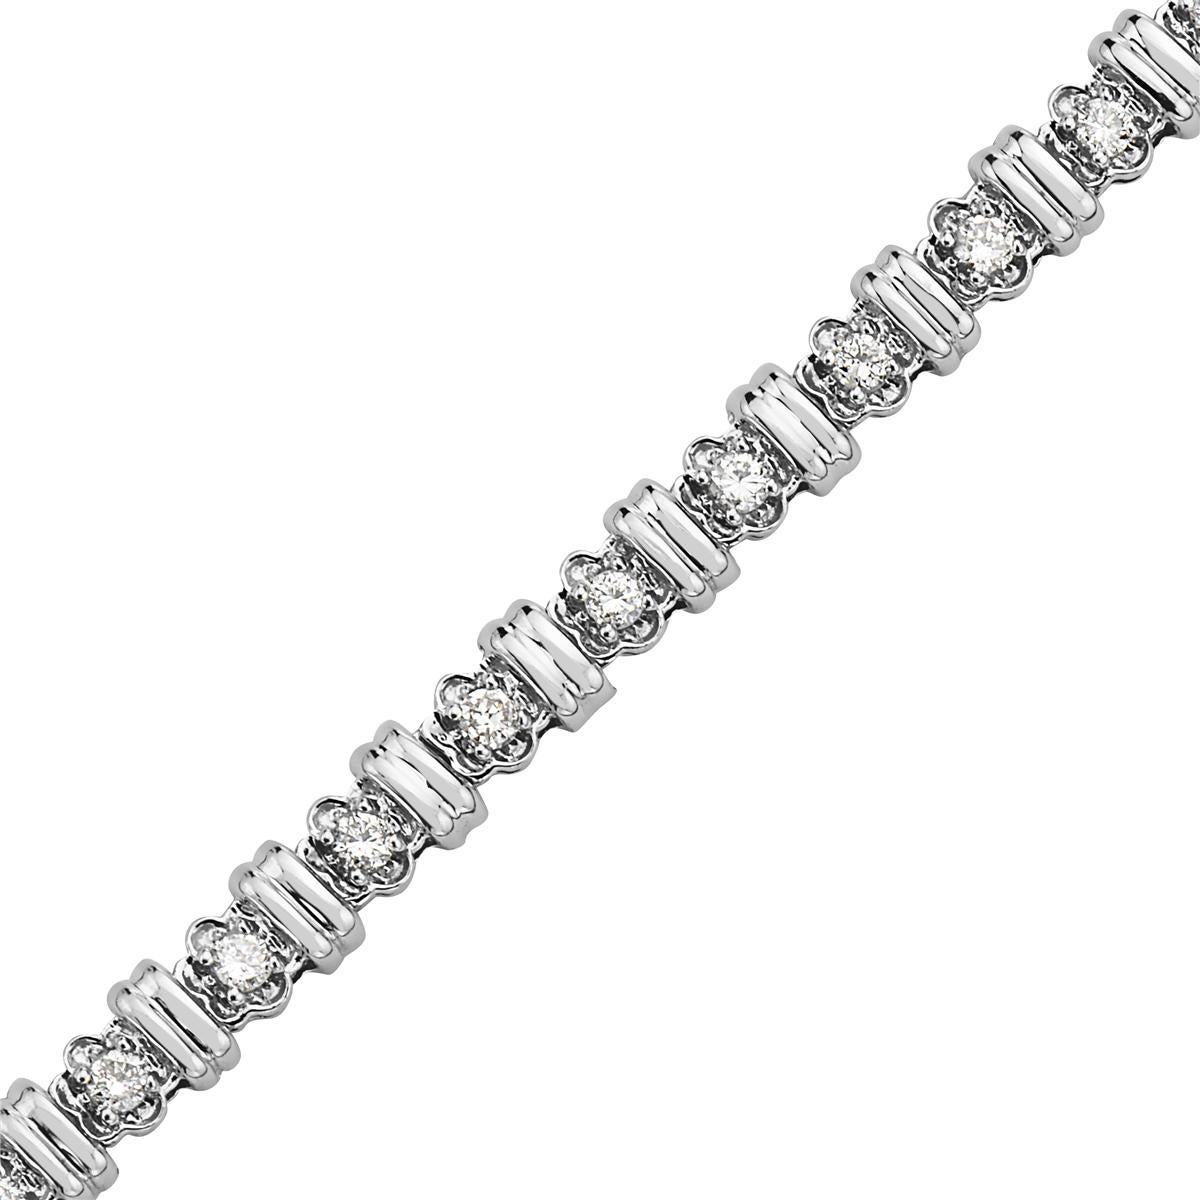 This bracelet features 0.75 carats of round diamonds set in 14K white gold. 7.5 inch. 10.7 grams total weight. 


Viewings available in our NYC showroom by appointment.